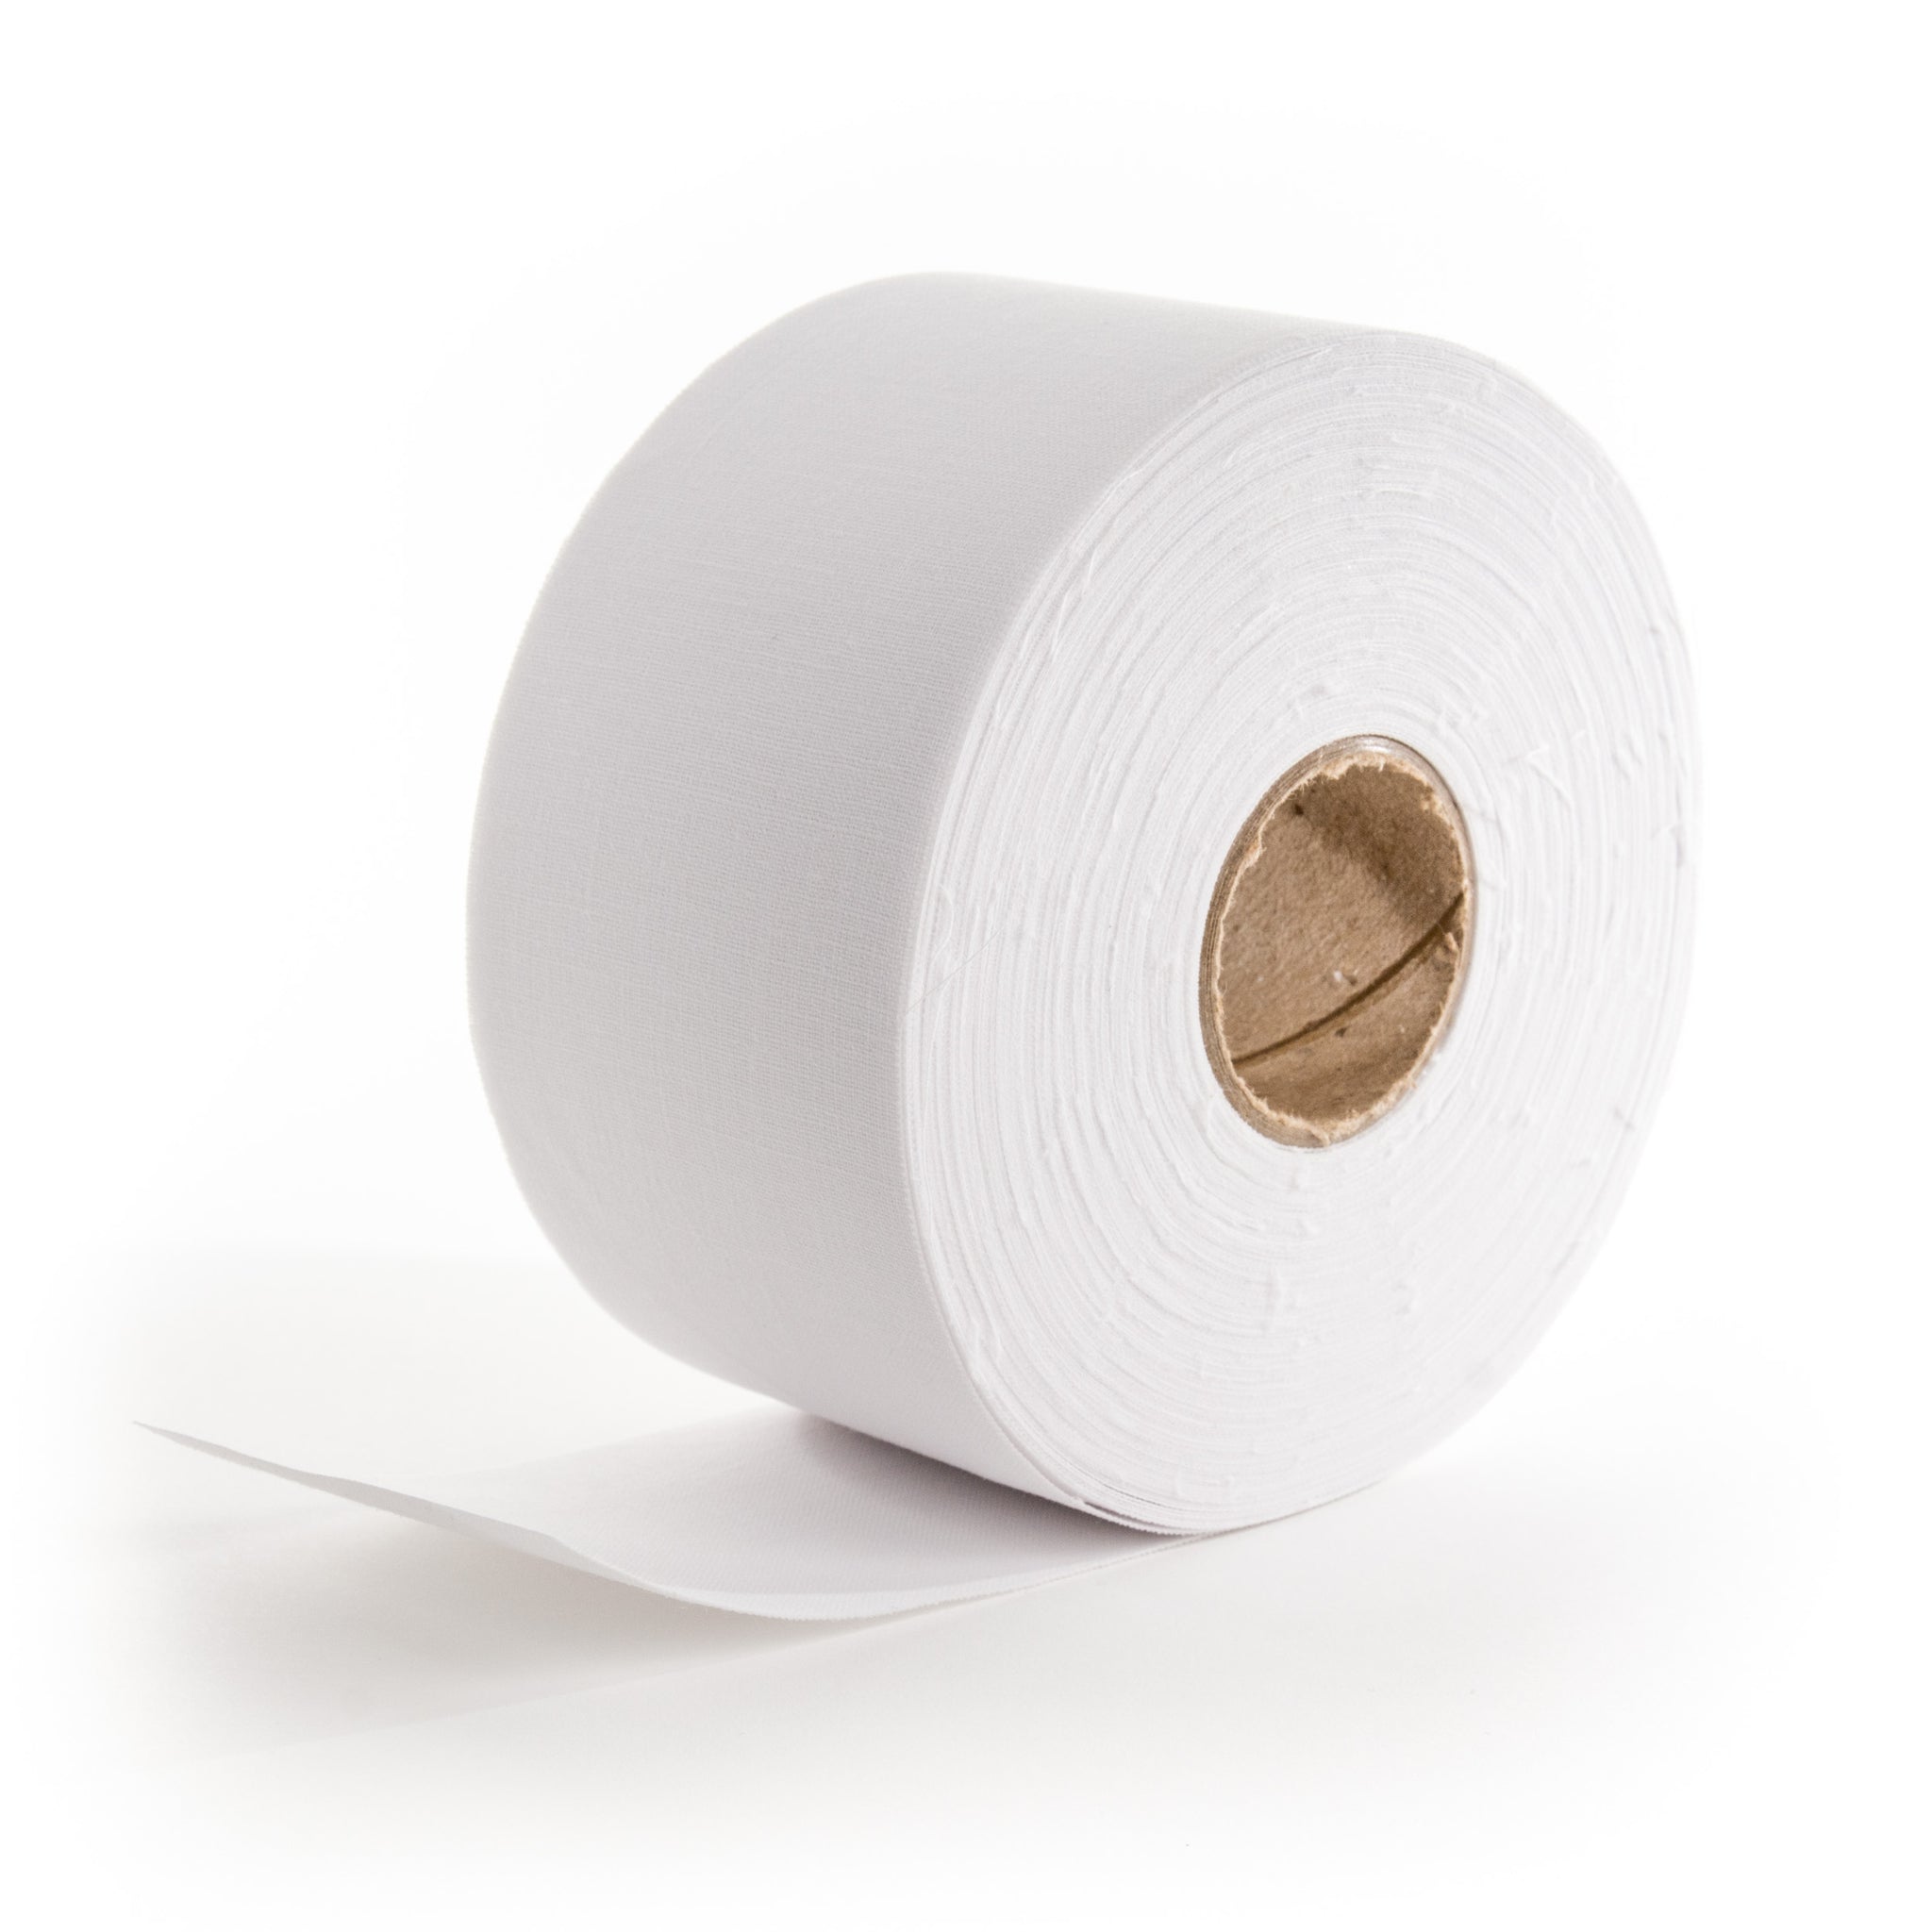 Professional Spa Quality - Bleached Cotton Roll - For Hair Removal - 40 Yards x 2.5